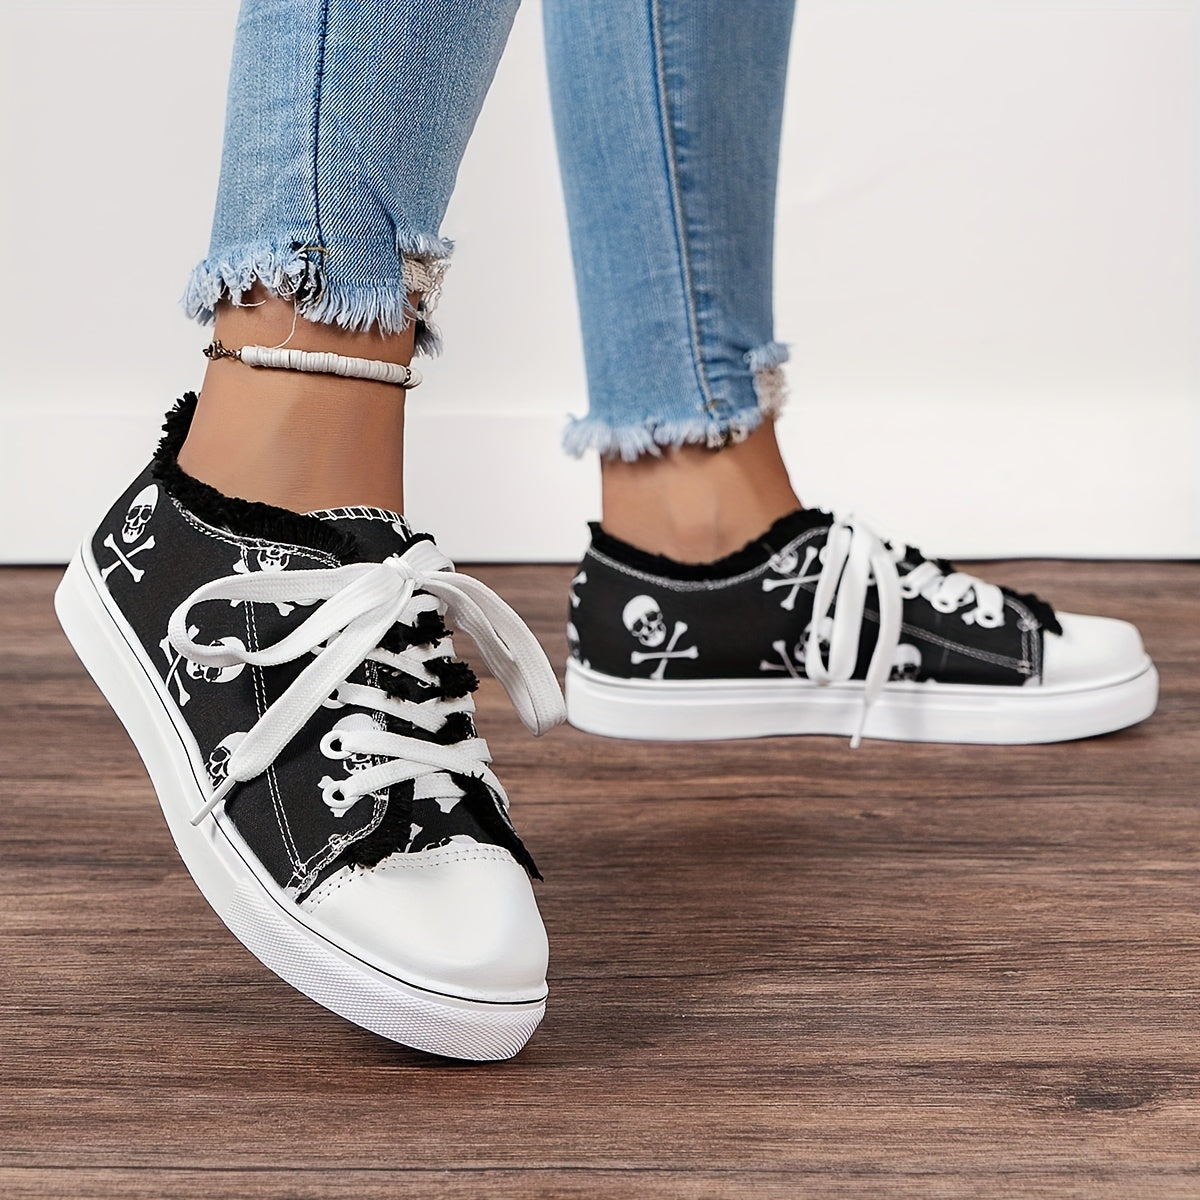 Skull Pattern Canvas Shoes, Casual Low Top Sneakers